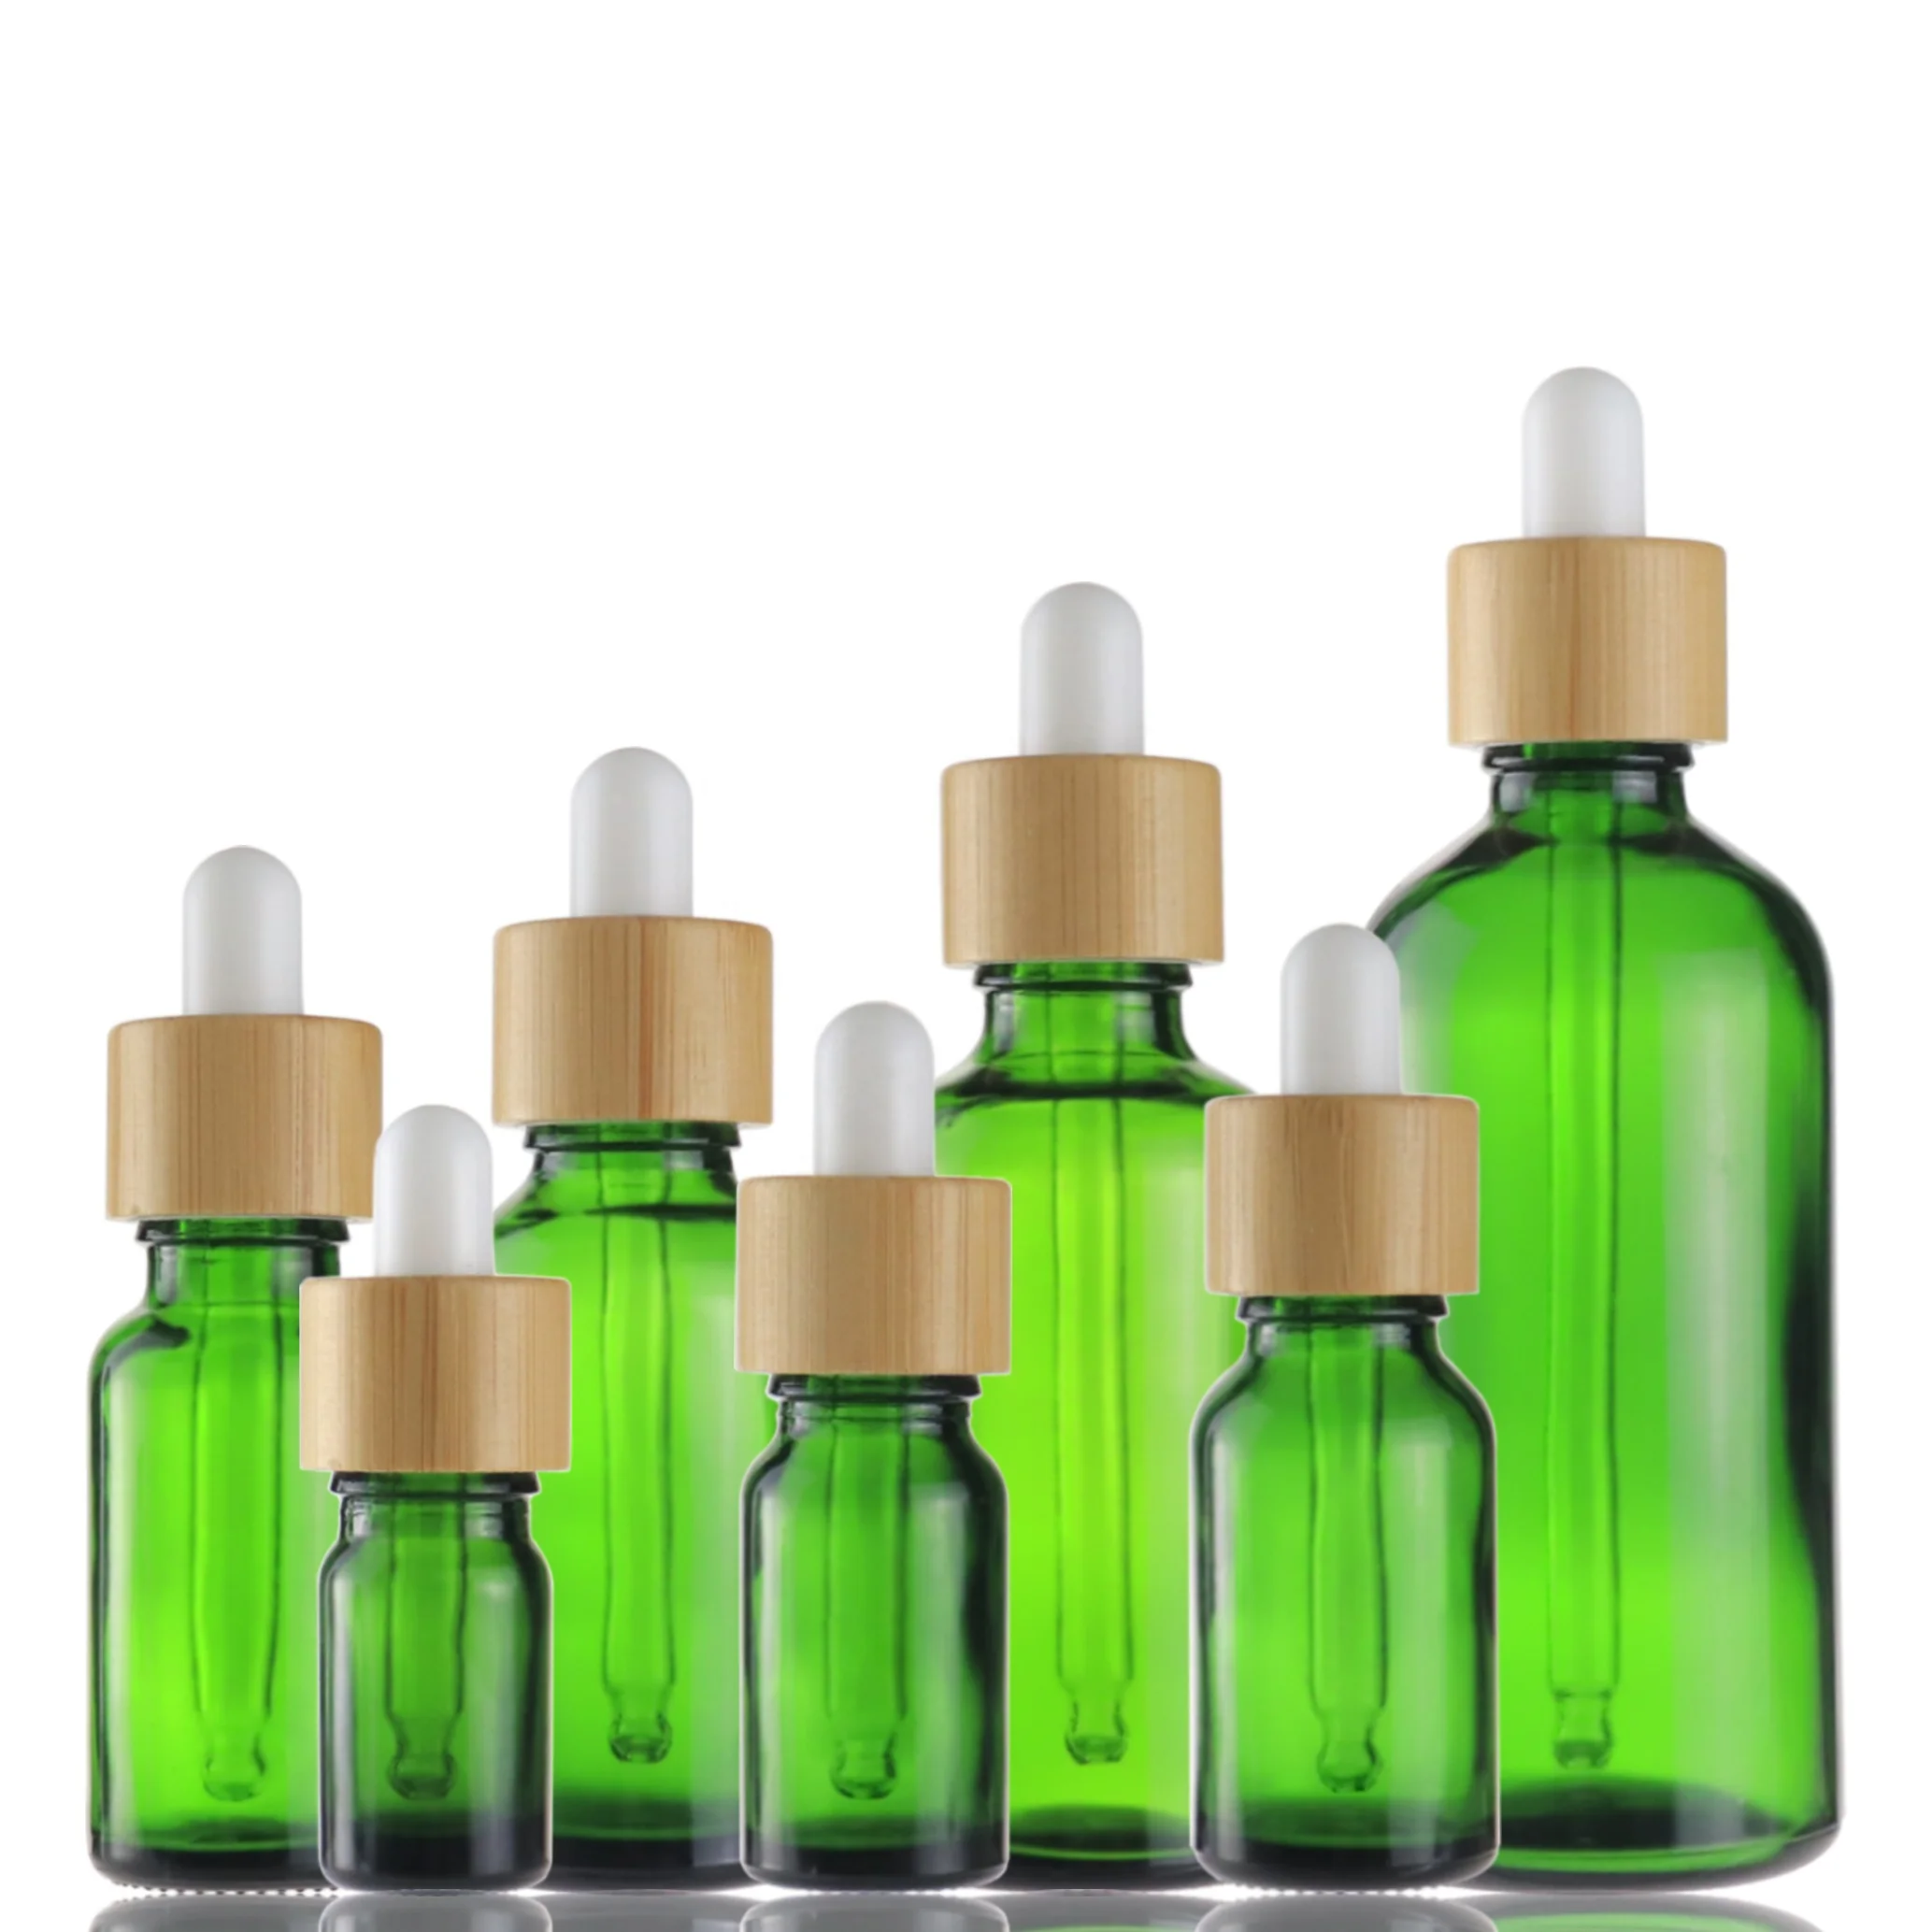 Download 5ml 10ml 15ml 20ml 30ml 50ml 100ml Green Cosmetic Essential Oil Glass Bottle With Dropper Pump Spray Screw Cap Buy Essential Oil Glass Bottle Green Glass Bottles 5ml 10ml 15ml 20ml 30ml 50ml